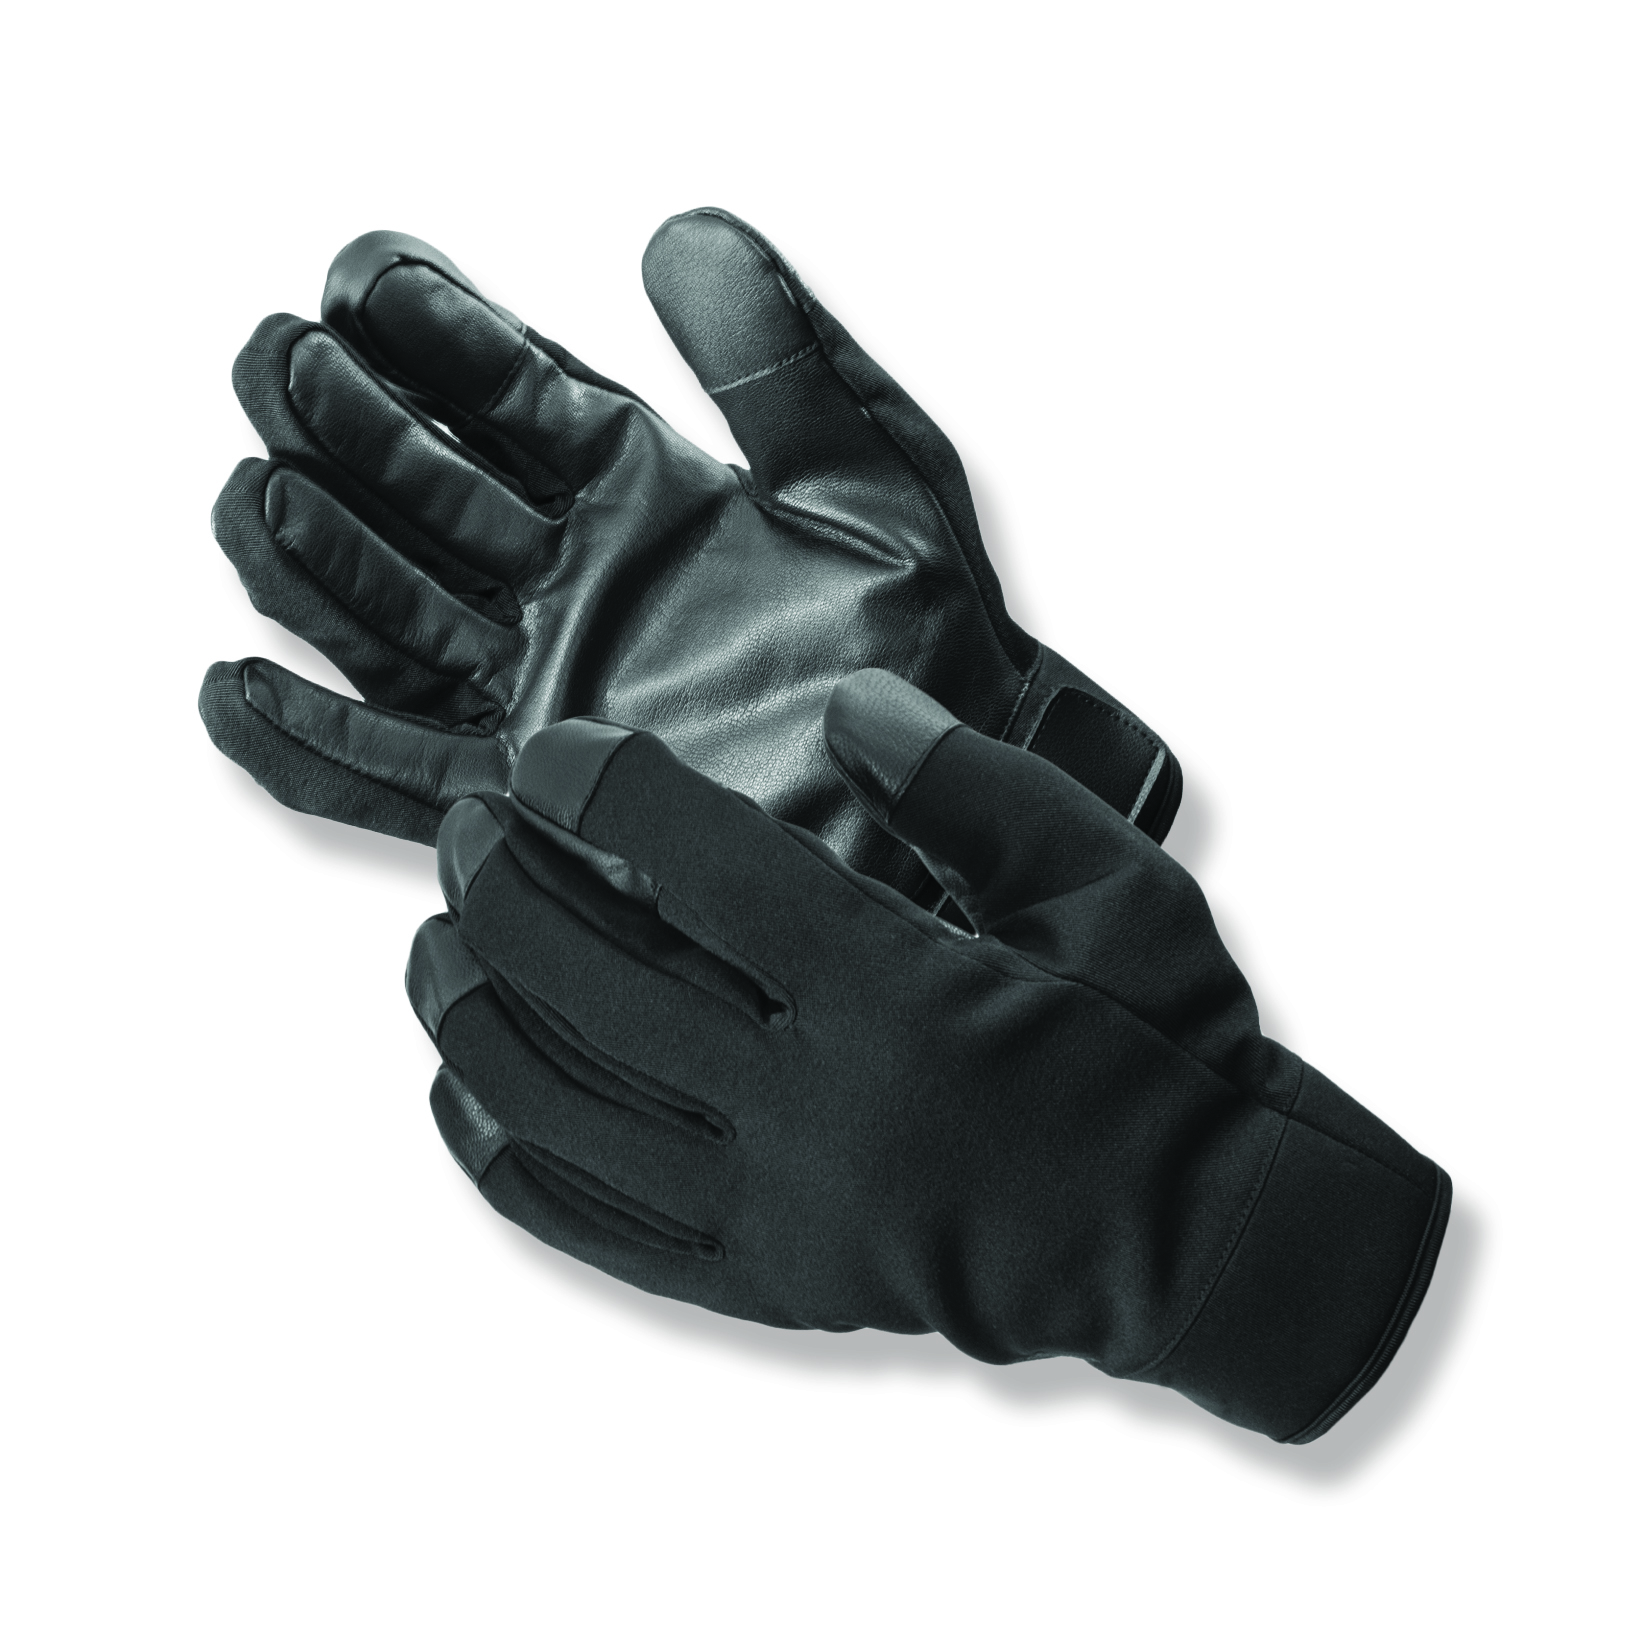 Transit TS™ Leather Palm Spandex Shell Uniform Gloves feature 40 gram Thinsulate